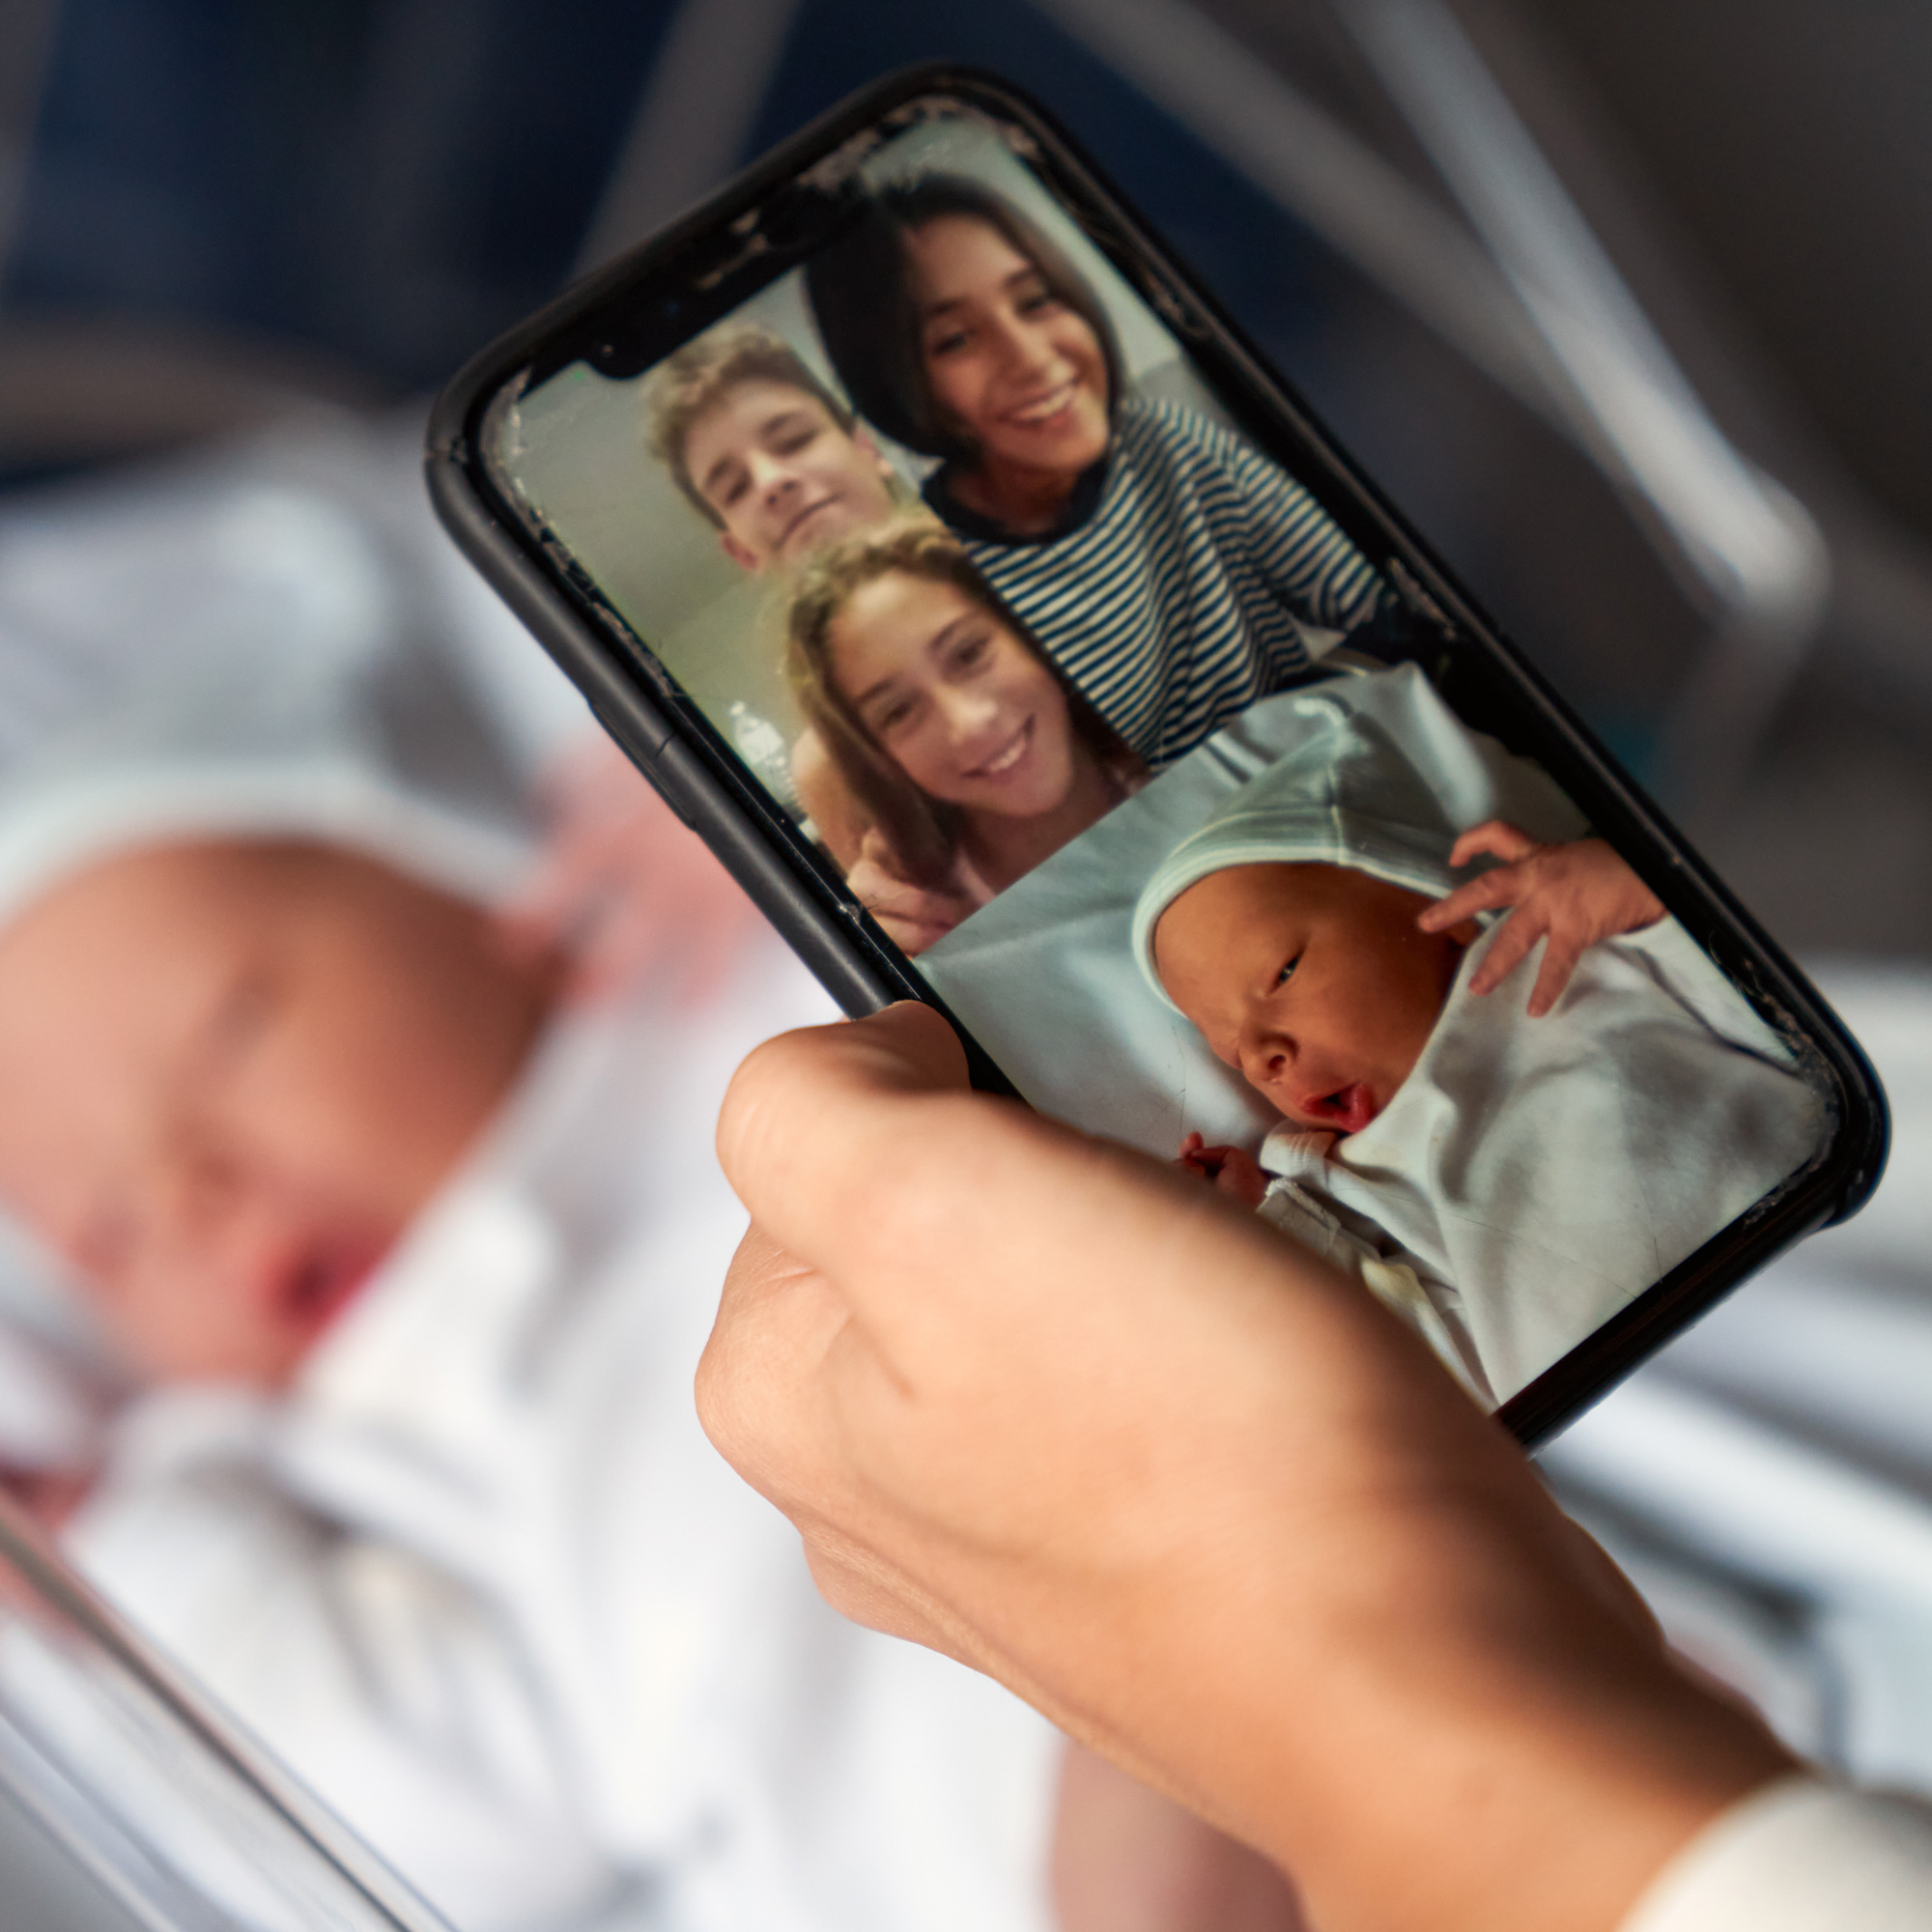 newborn baby on a smartphone video call with family